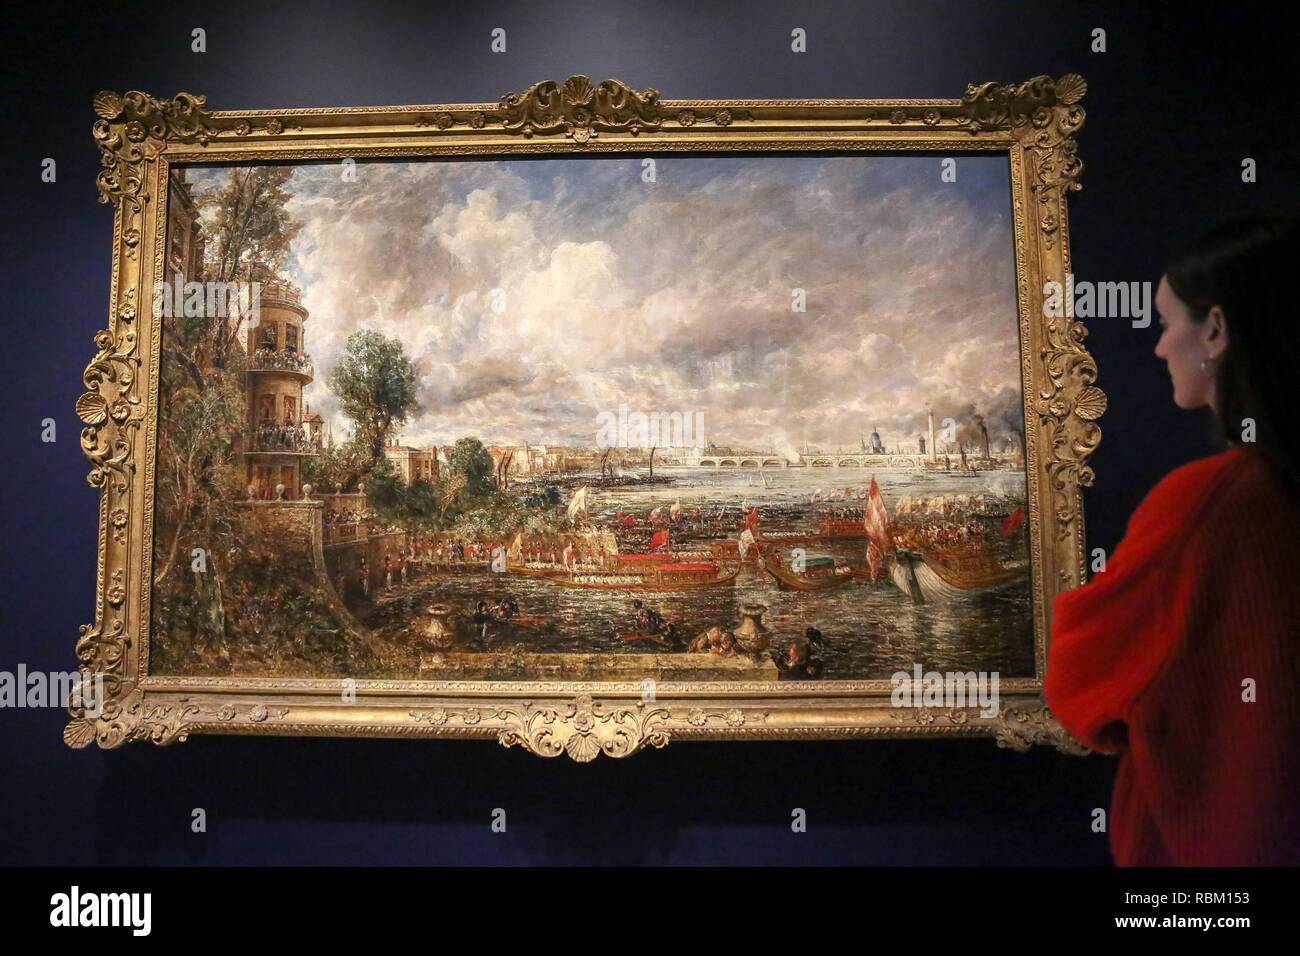 London, UK. 11th Jan, 2019. A staff member seen viewing a painting by John Constable.The Royal Academy Schools' most illustrious graduates, exhibits Helvoetsluys ('Helvoetsluys; - the City of Utrecht, 64, going to sea') 1832 by J.M.W. Turner (1775-1851) and The opening of Waterloo Bridge ('Waterloo Bridge, from the Whitehall Stairs, 18th June 1817) by John Constable (1776-1837), in, are-telling of one of the most legendary events in the history of the Summer Exhibition, it toke place at the Royal Academy of Arts. The two paintings were reunited for the first time since th Stock Photo